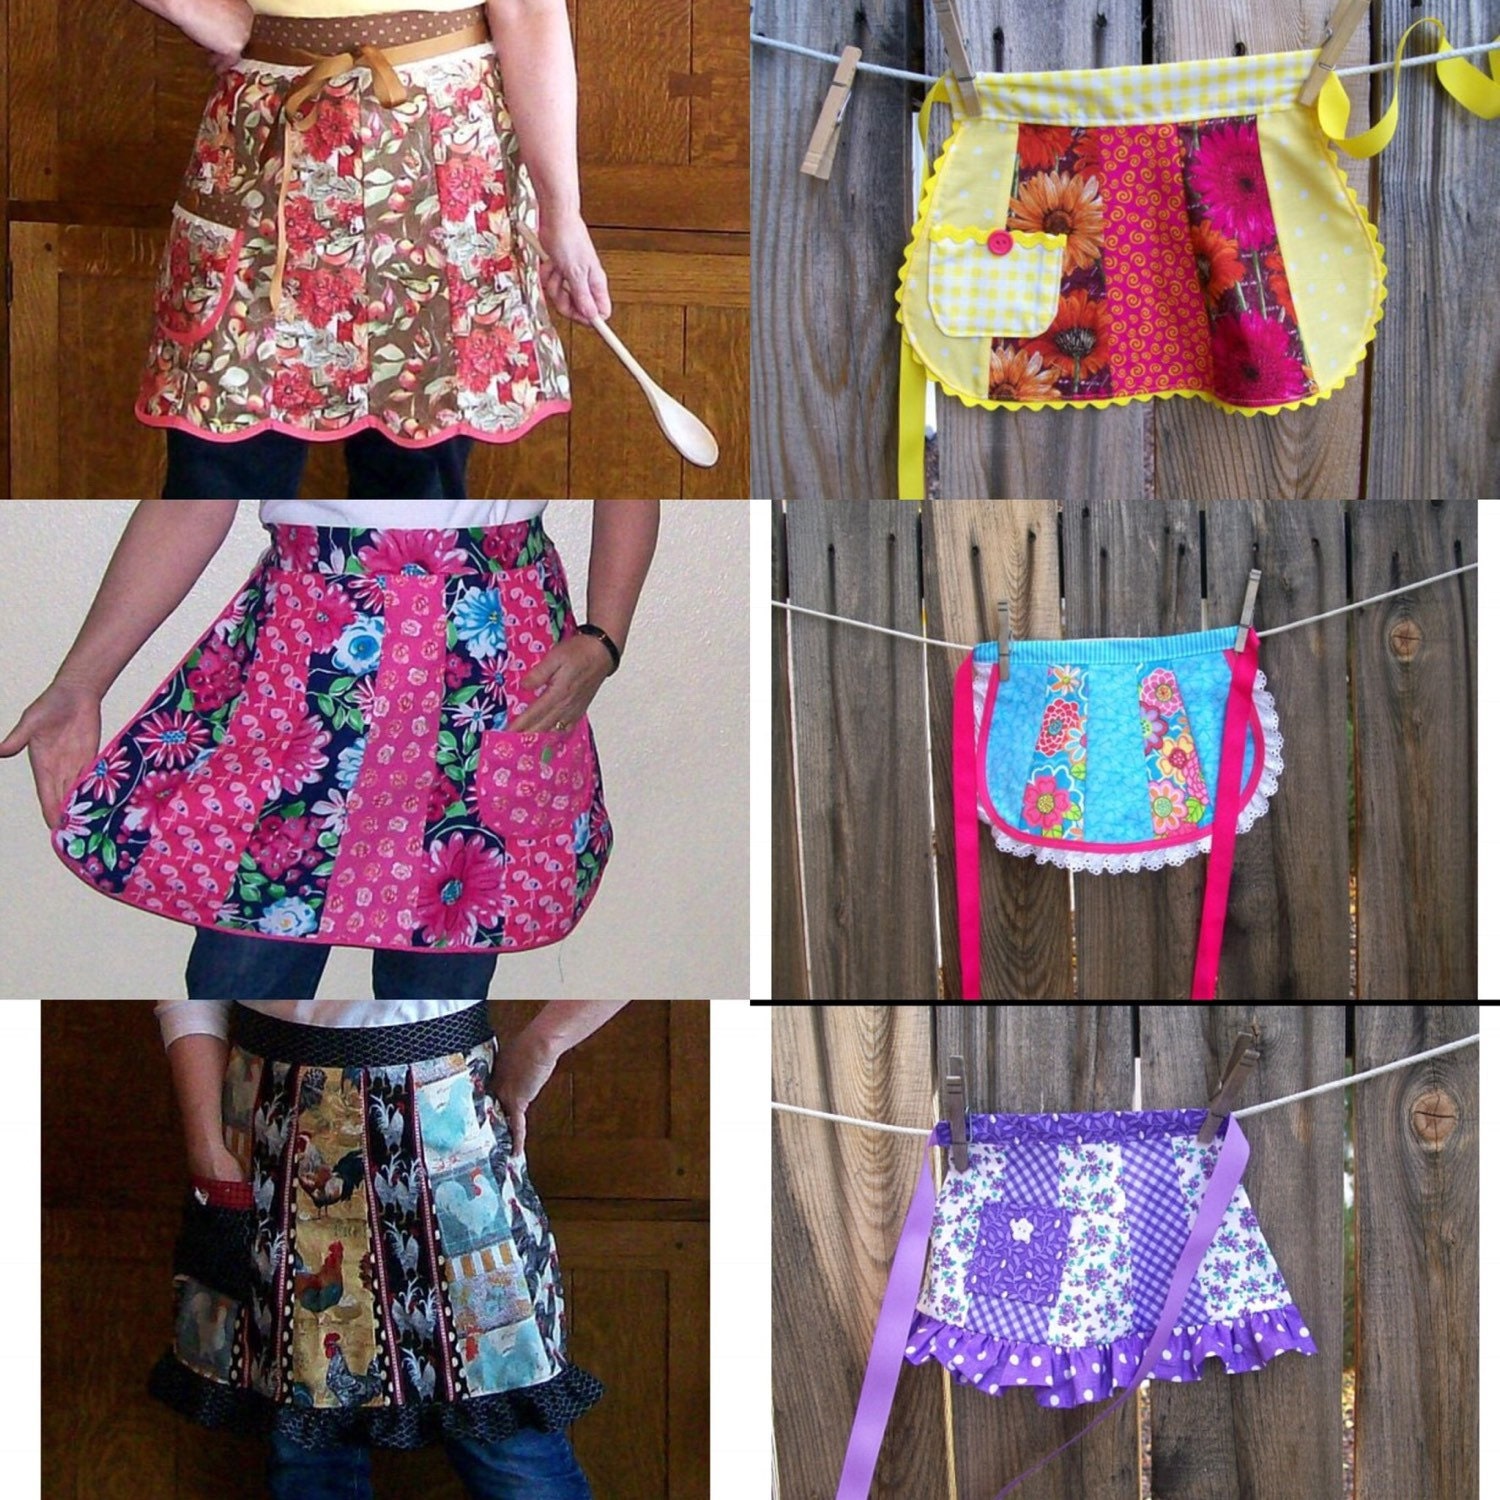 Updates from SusiesTieOneOnAprons on Etsy